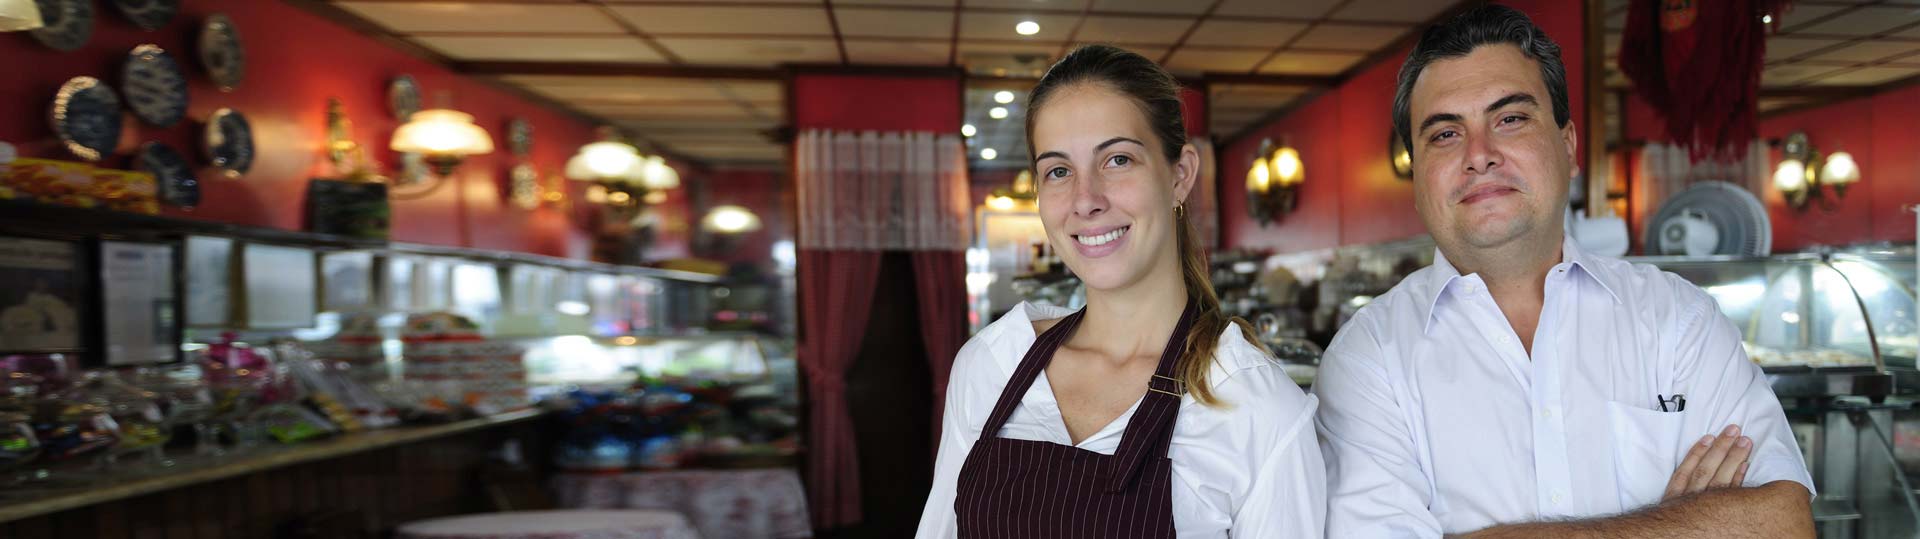 restaurant-business-owner-with-waitress